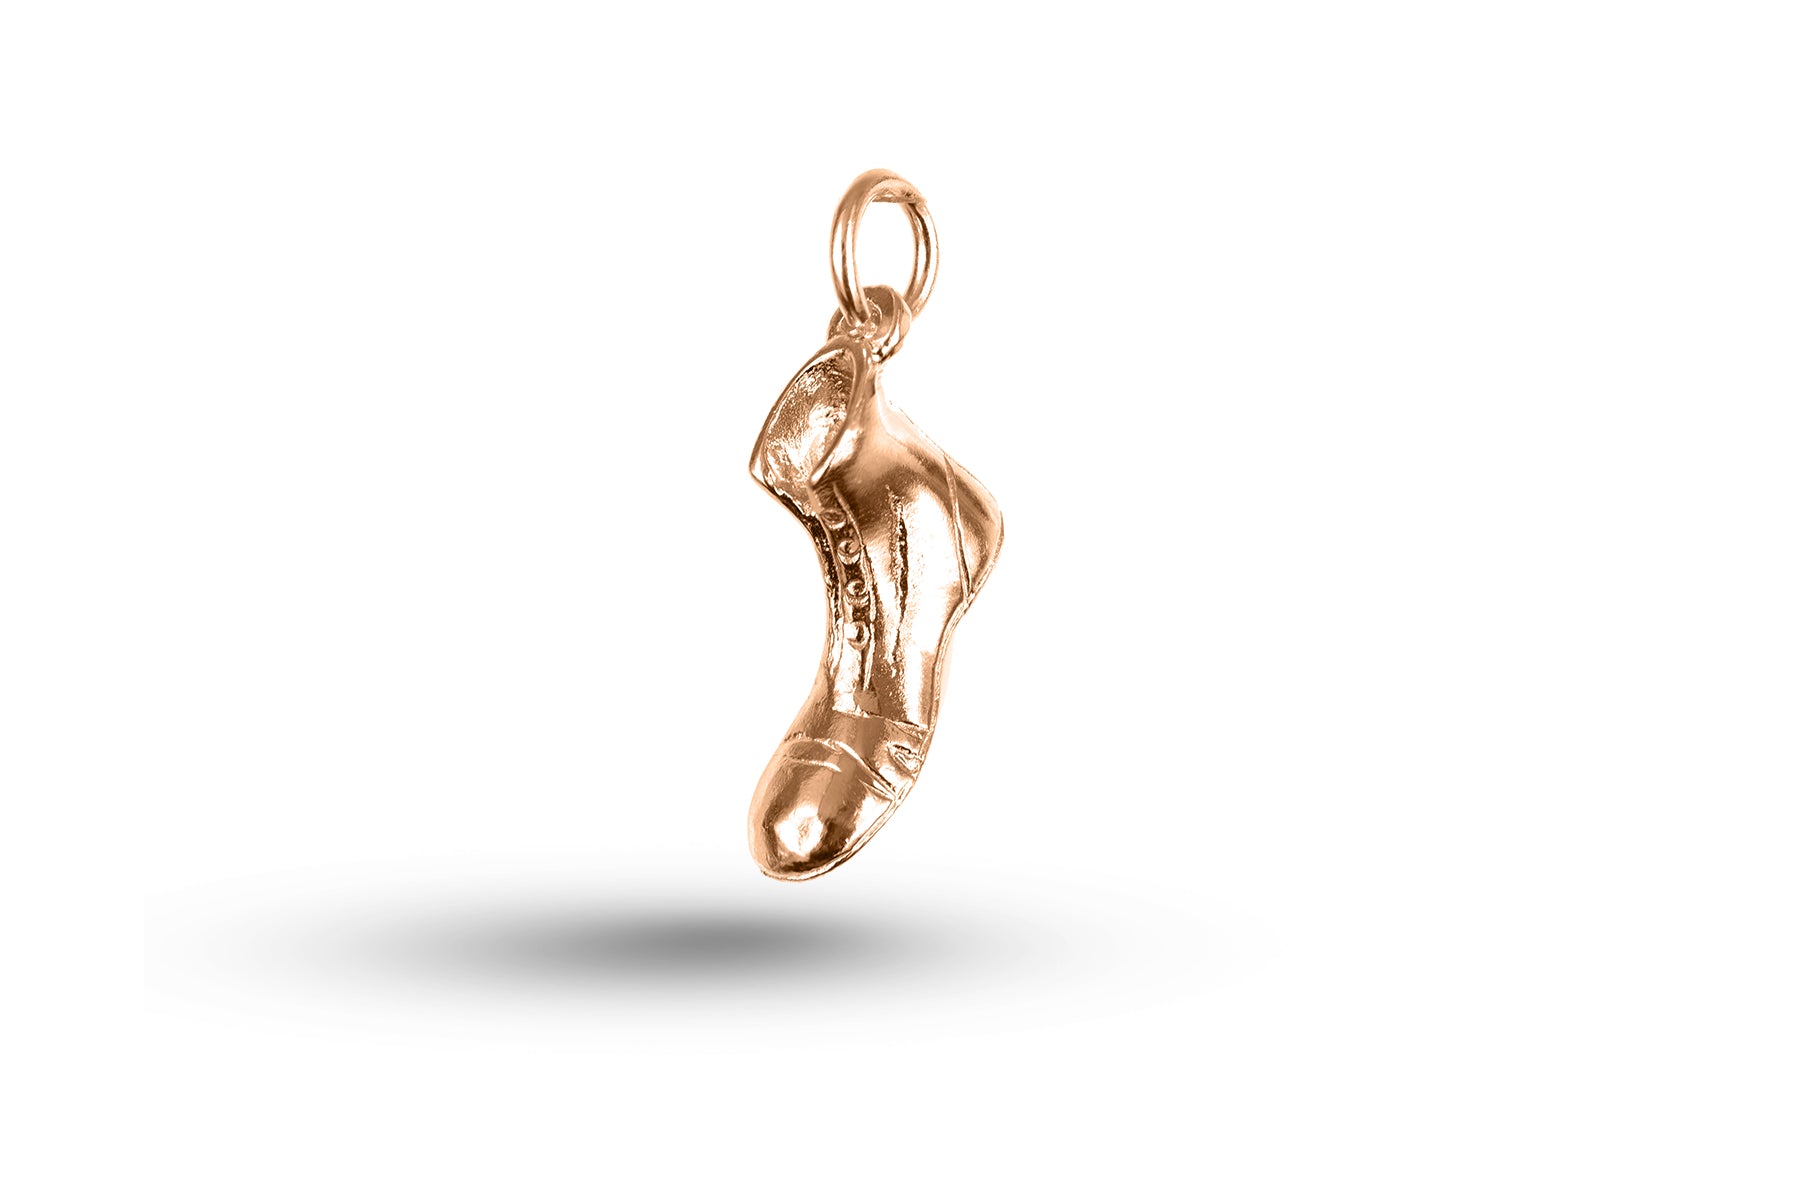 Luxury rose gold Boxing Boot charm.